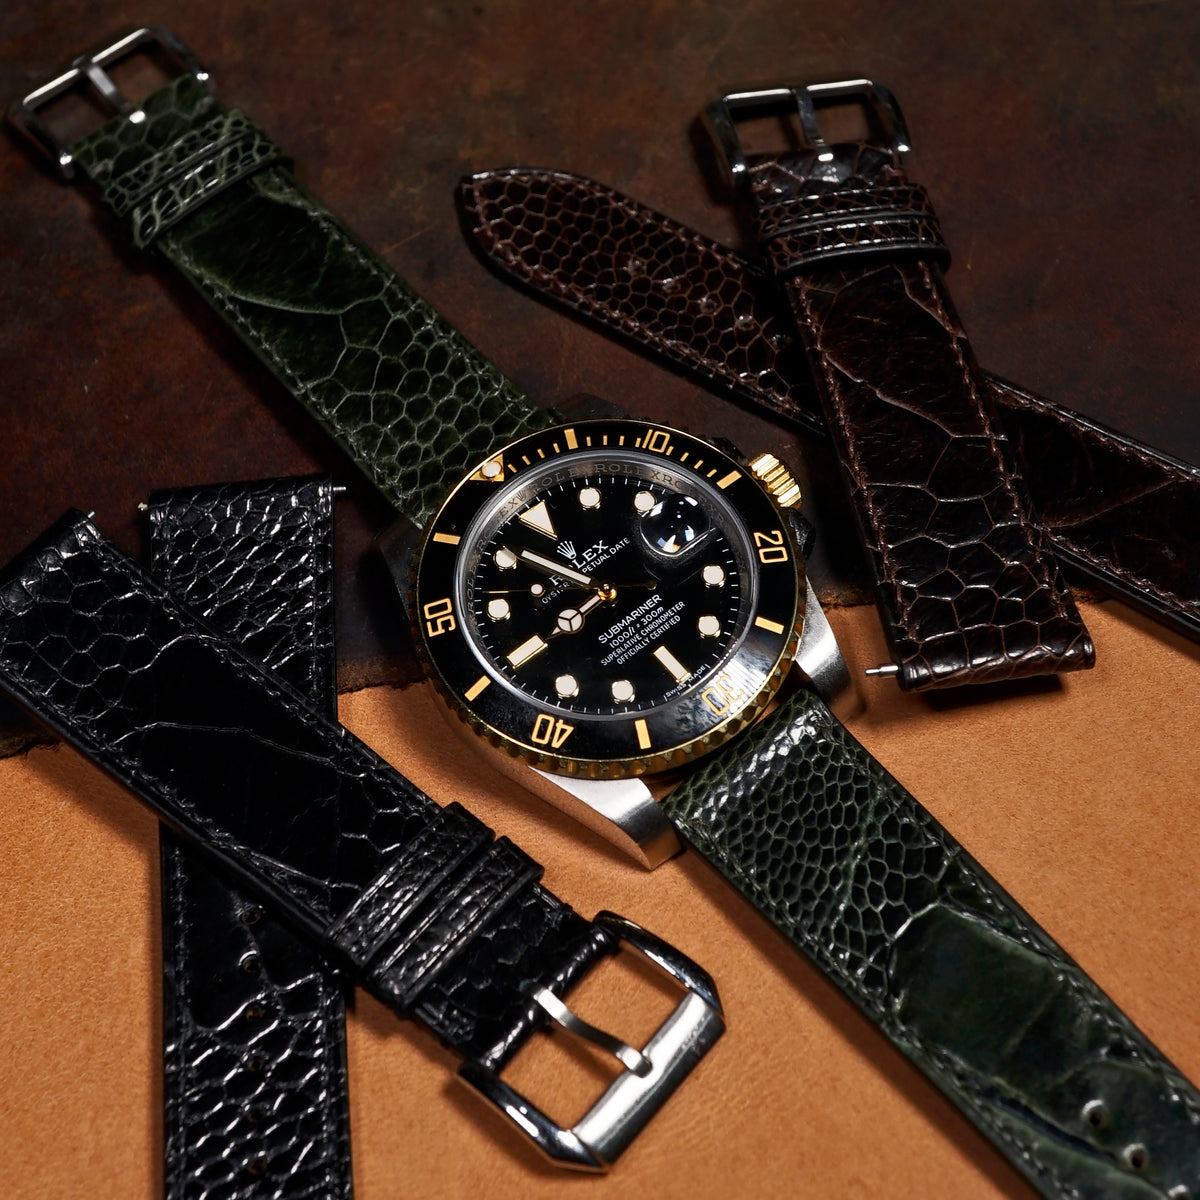 Ostrich Leather Watch Strap in Olive - Nomad Watch Works SG